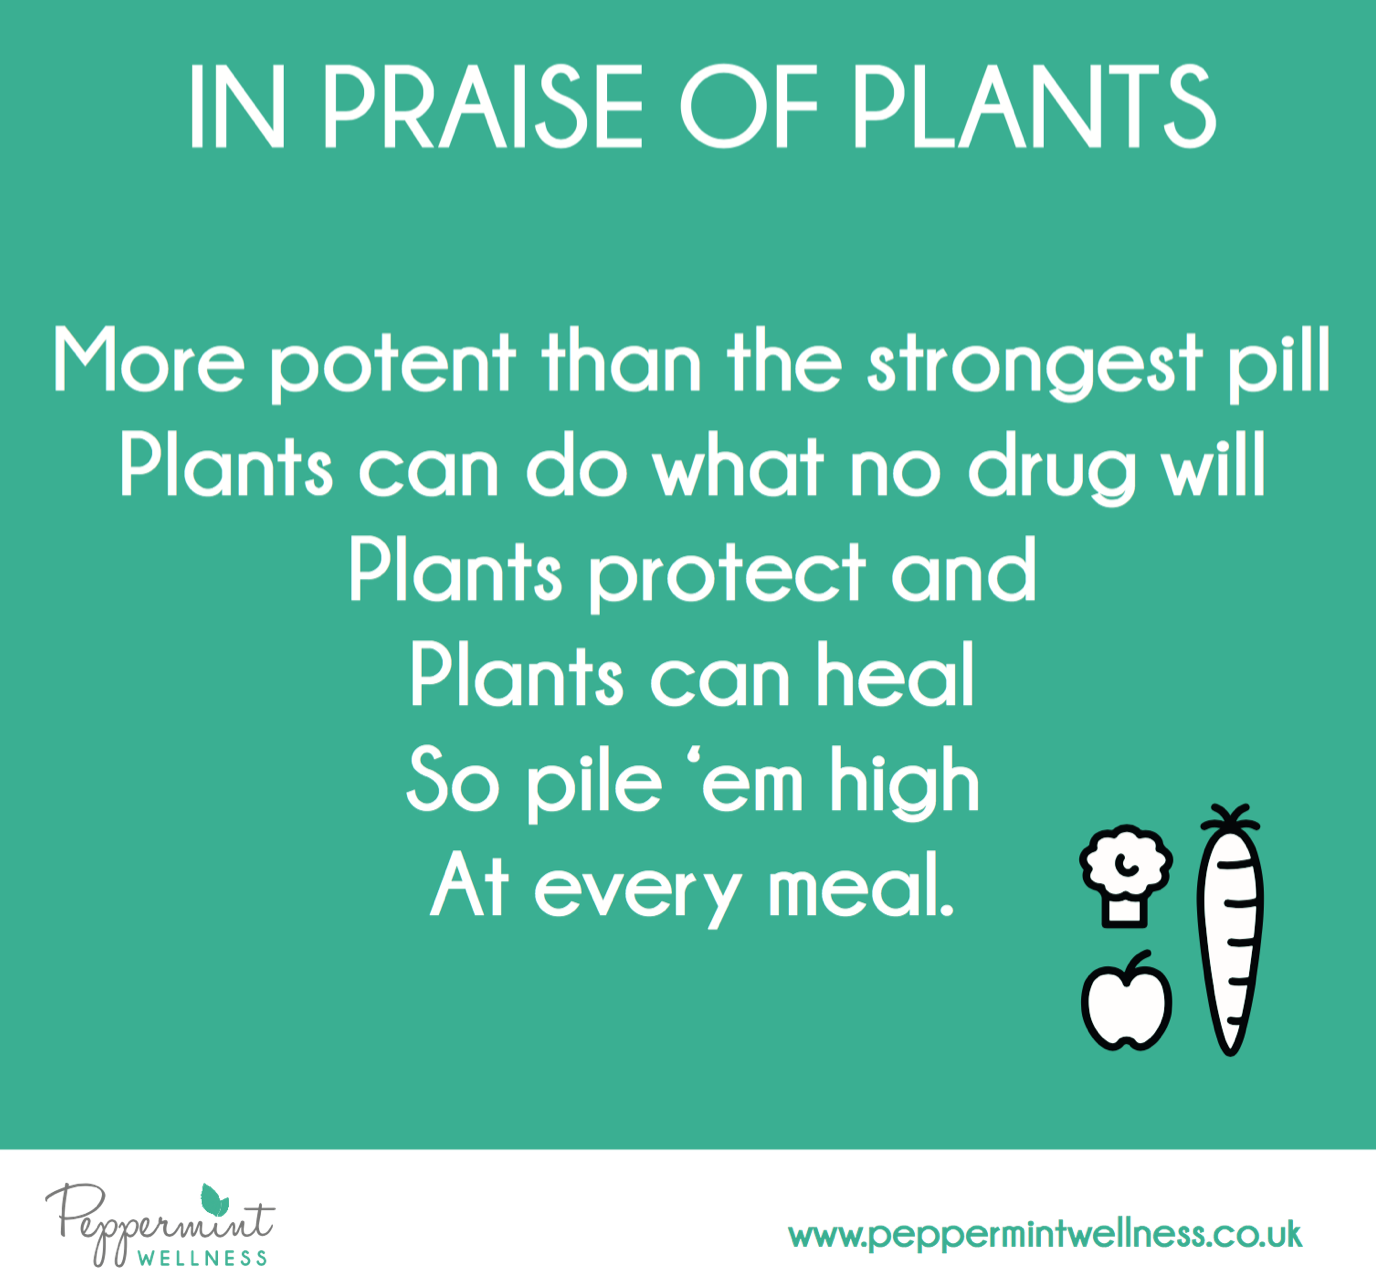 In Praise of Plants by Peppermint Wellness